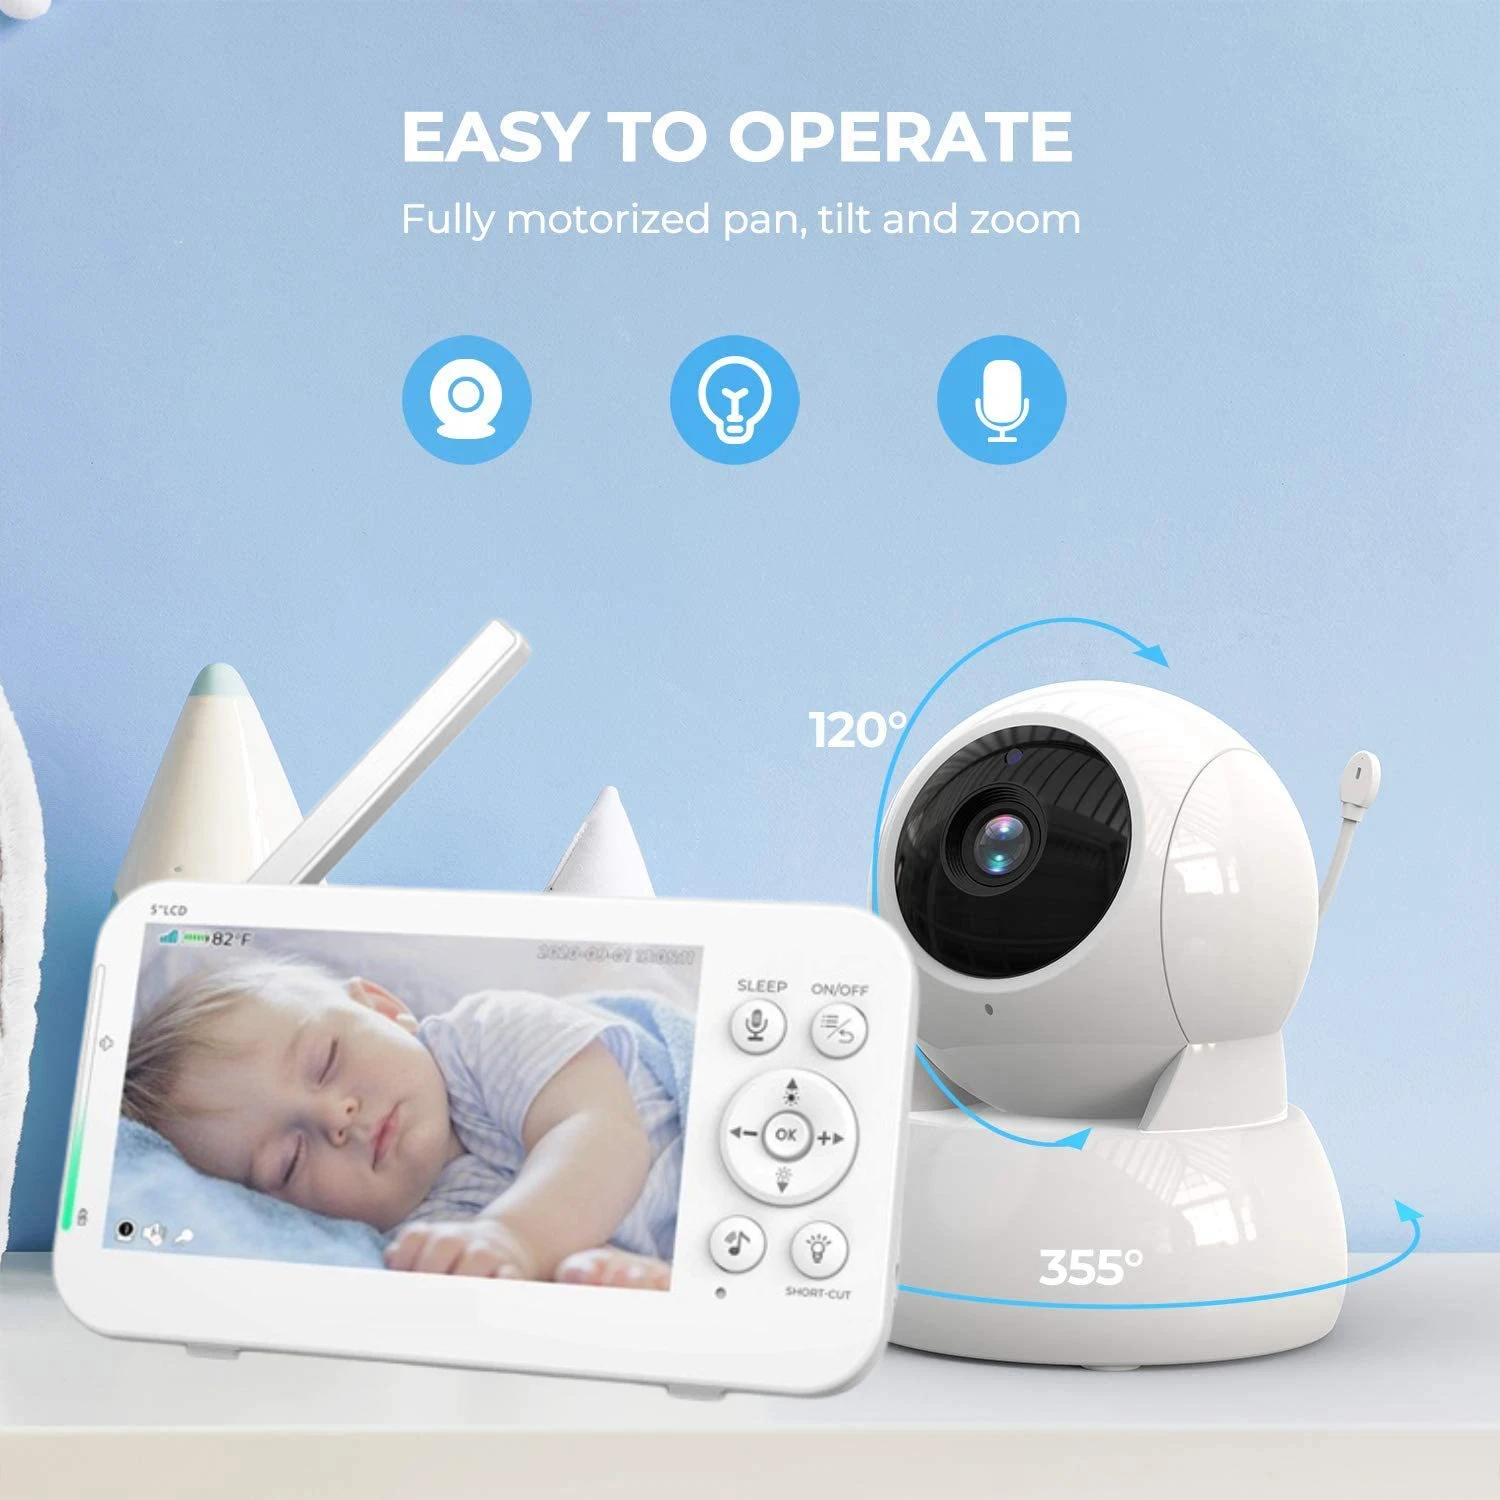 

Smart Baby Monitor, 5-Inch TFT LCD, Lullaby Player Camera, Two-Way Audio Talk, Temperature Monitor Built-in 5200mHA battery